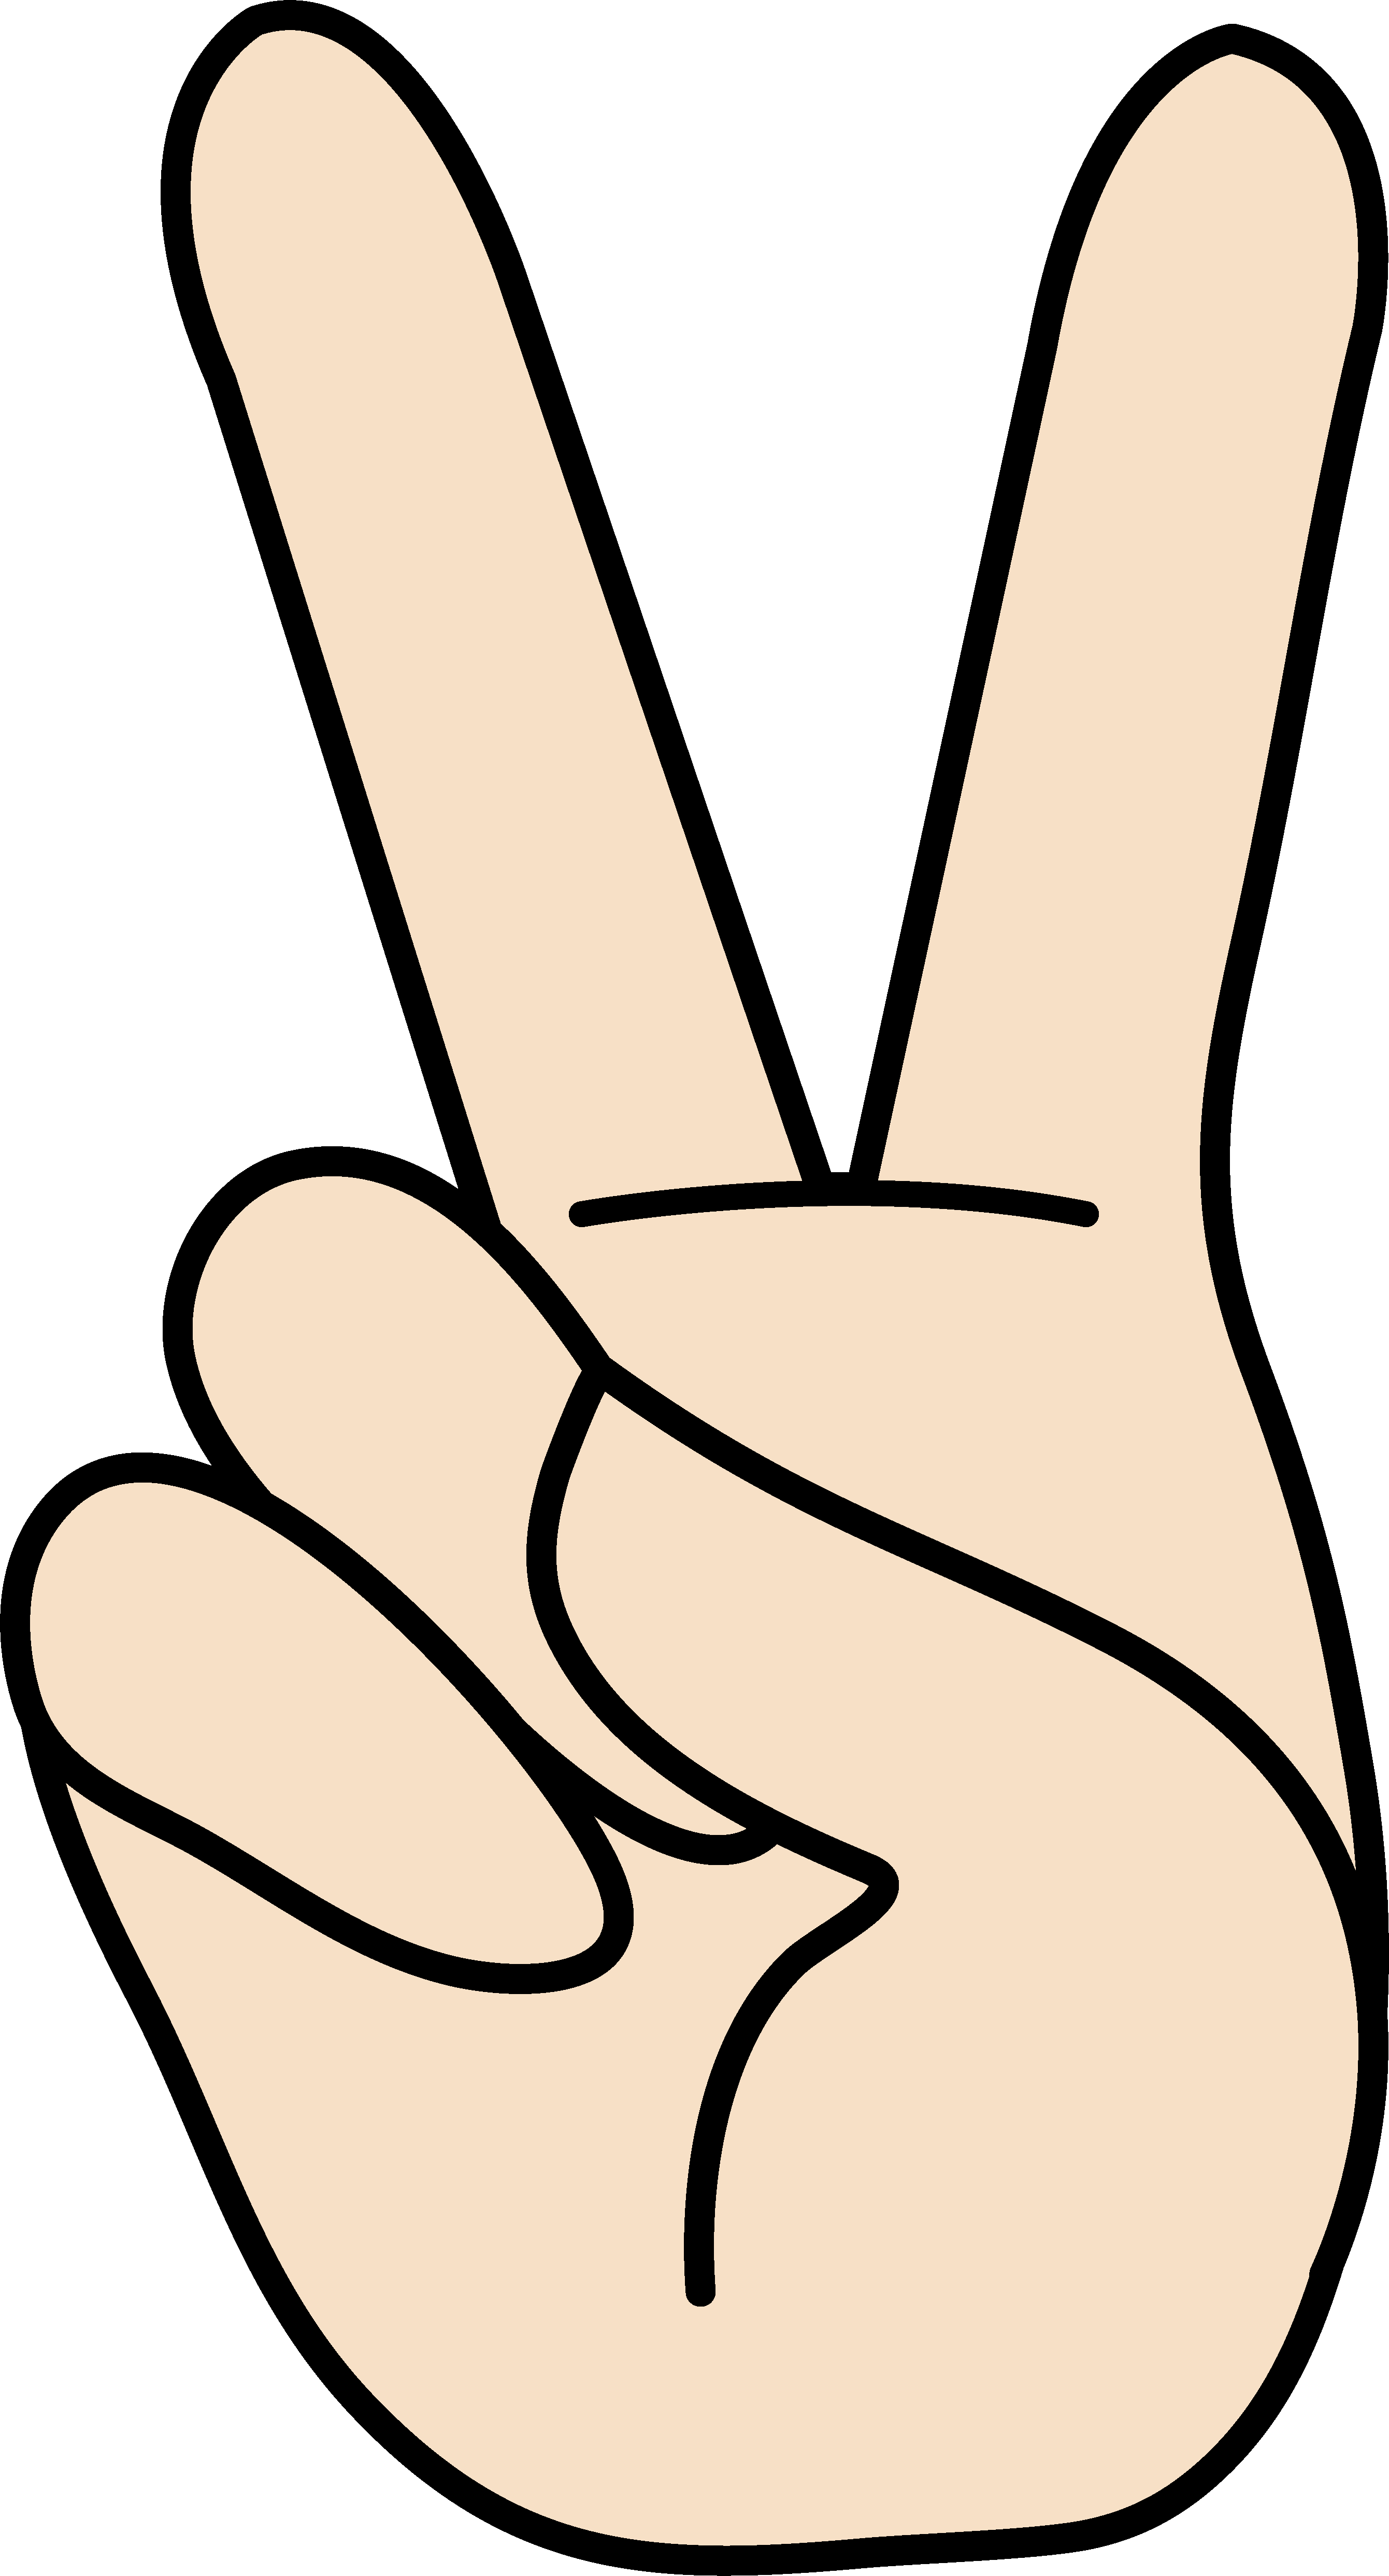 Peace hand sign free. Finger clipart wallpaper